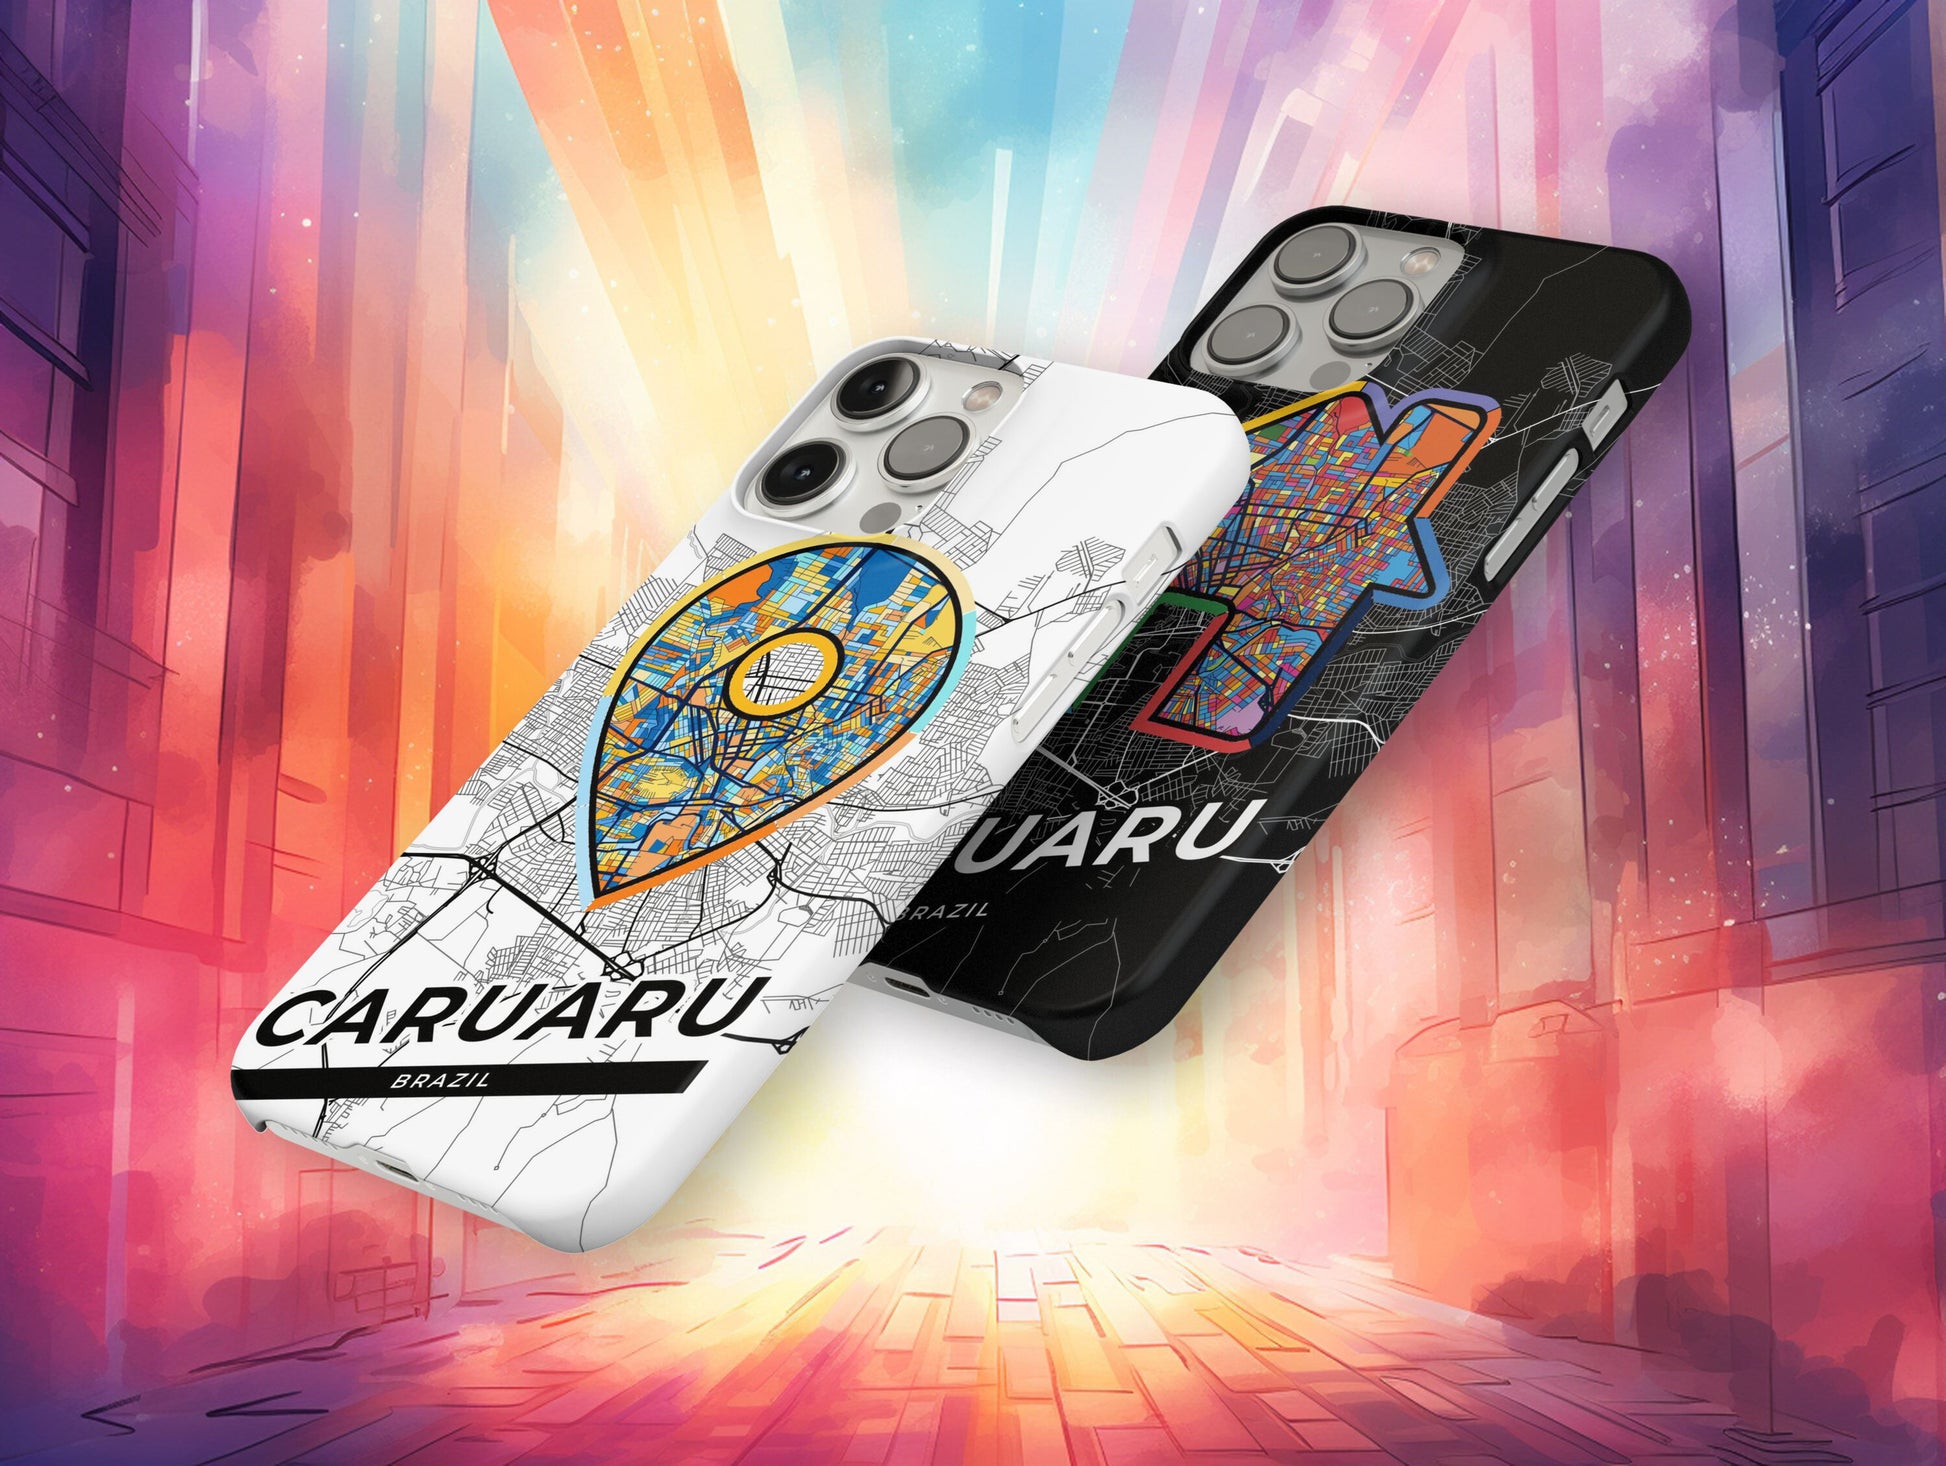 Caruaru Brazil slim phone case with colorful icon. Birthday, wedding or housewarming gift. Couple match cases.